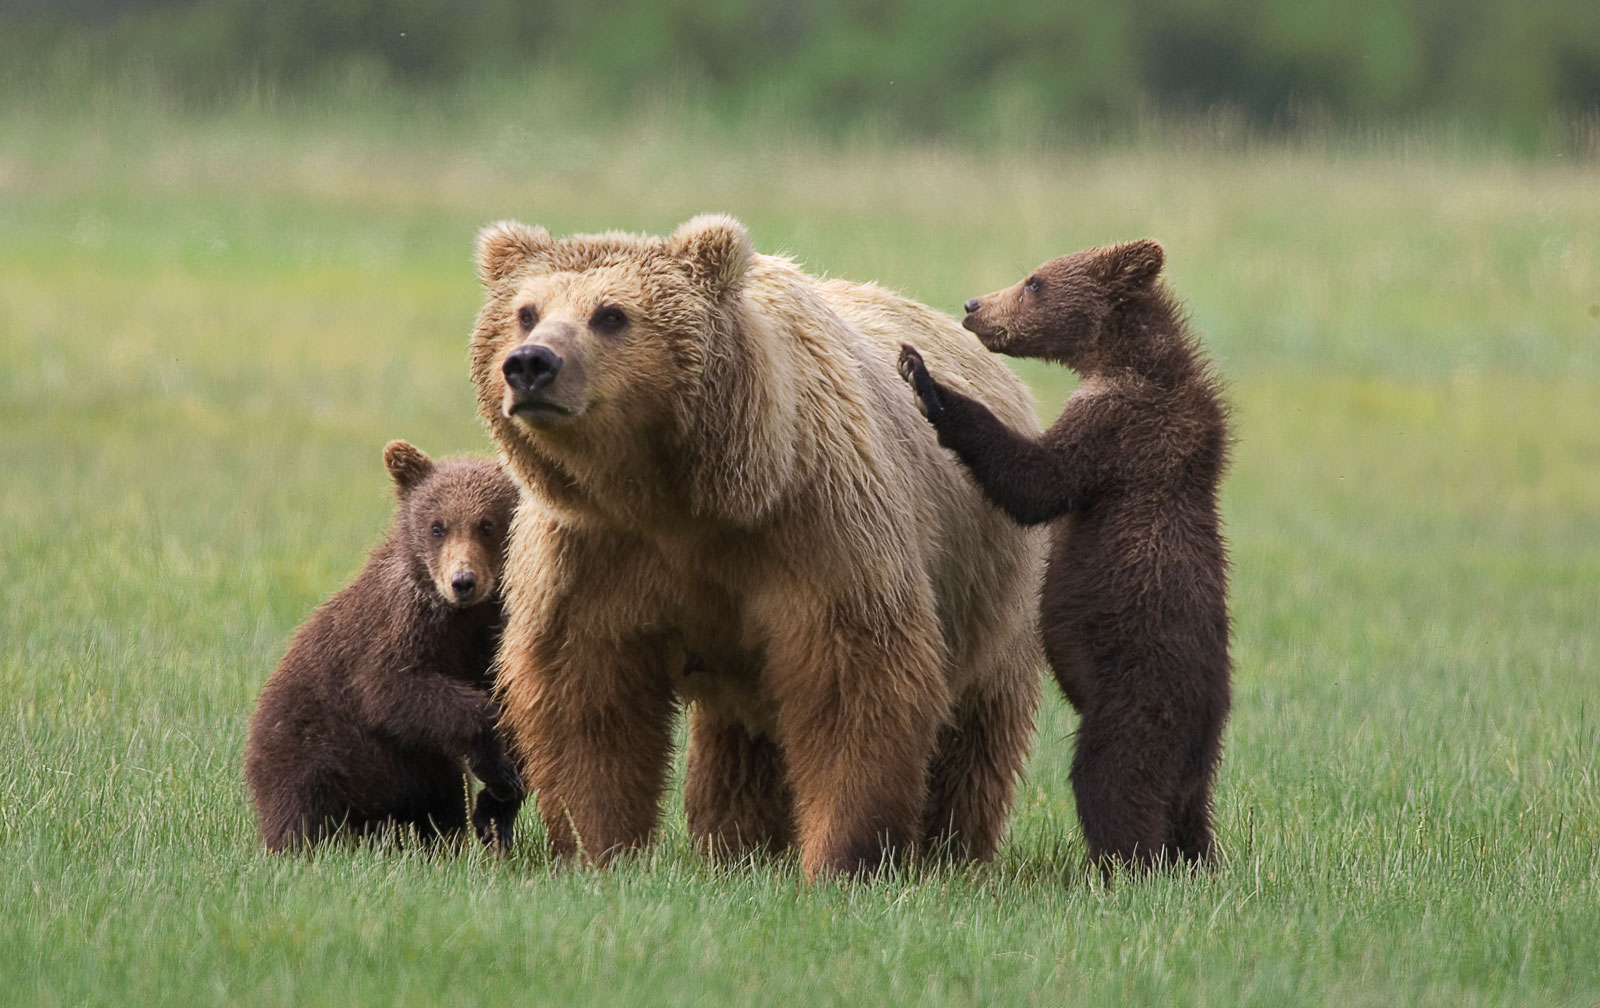 Mama Bear Protecting Cubs Quotes. QuotesGram